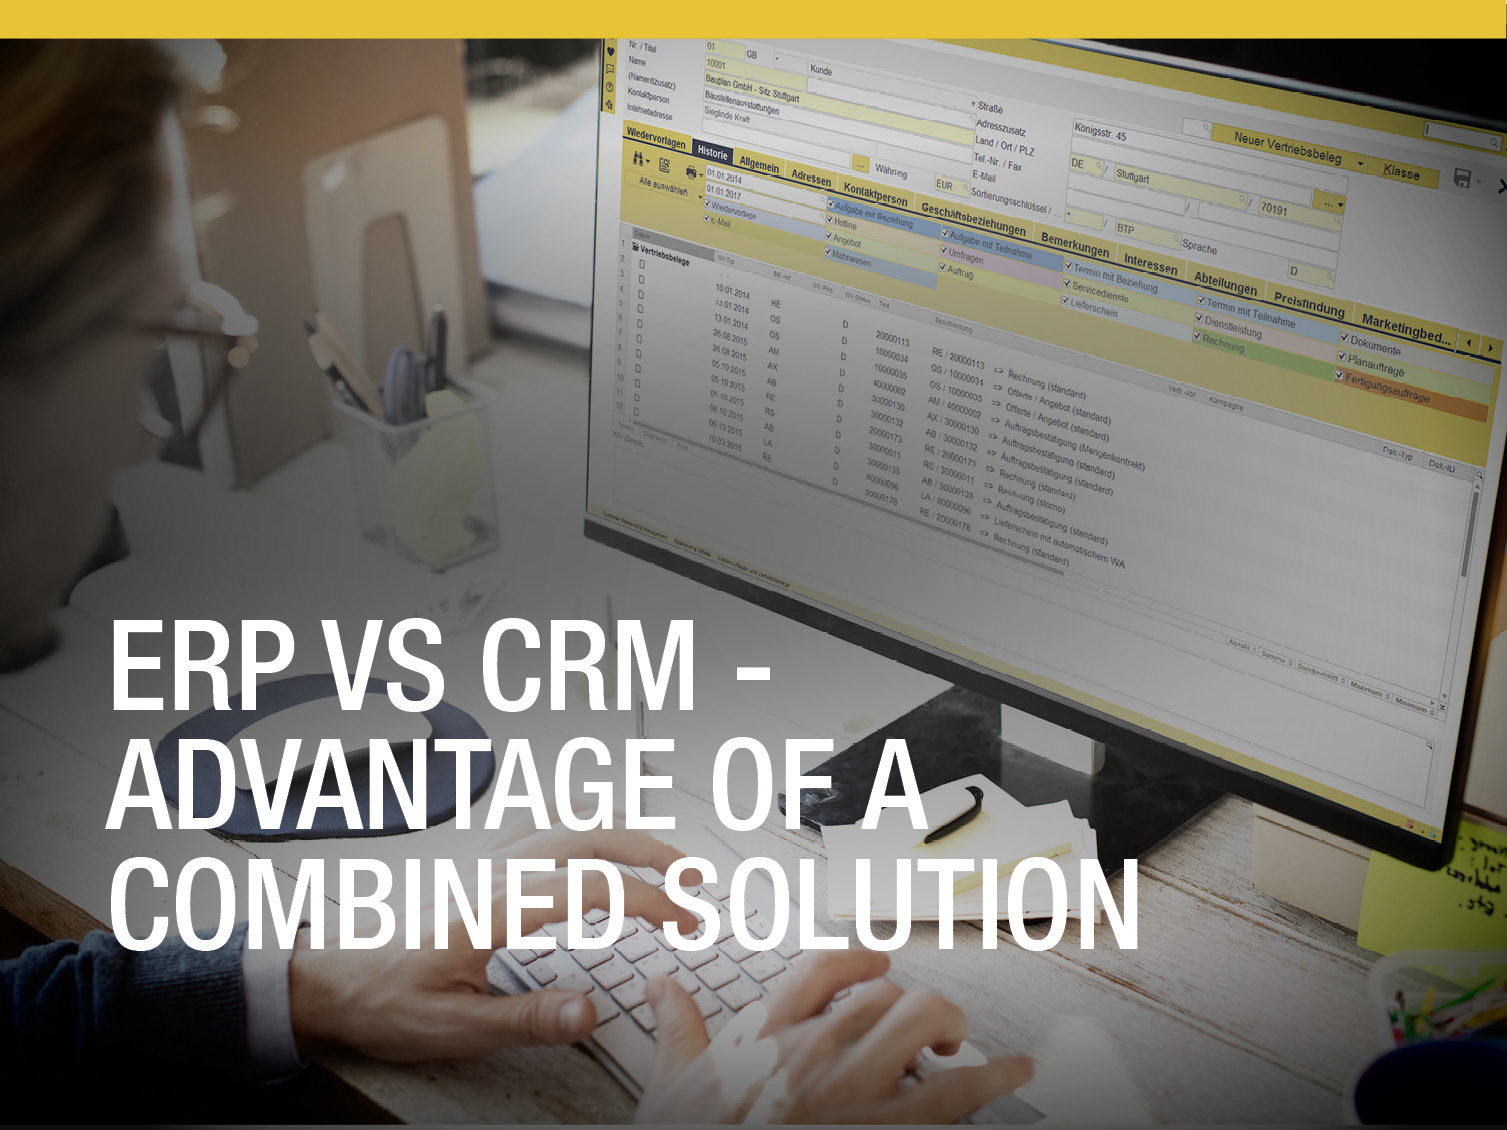 ERP Vs CRM - Advantage of a Combined Solution